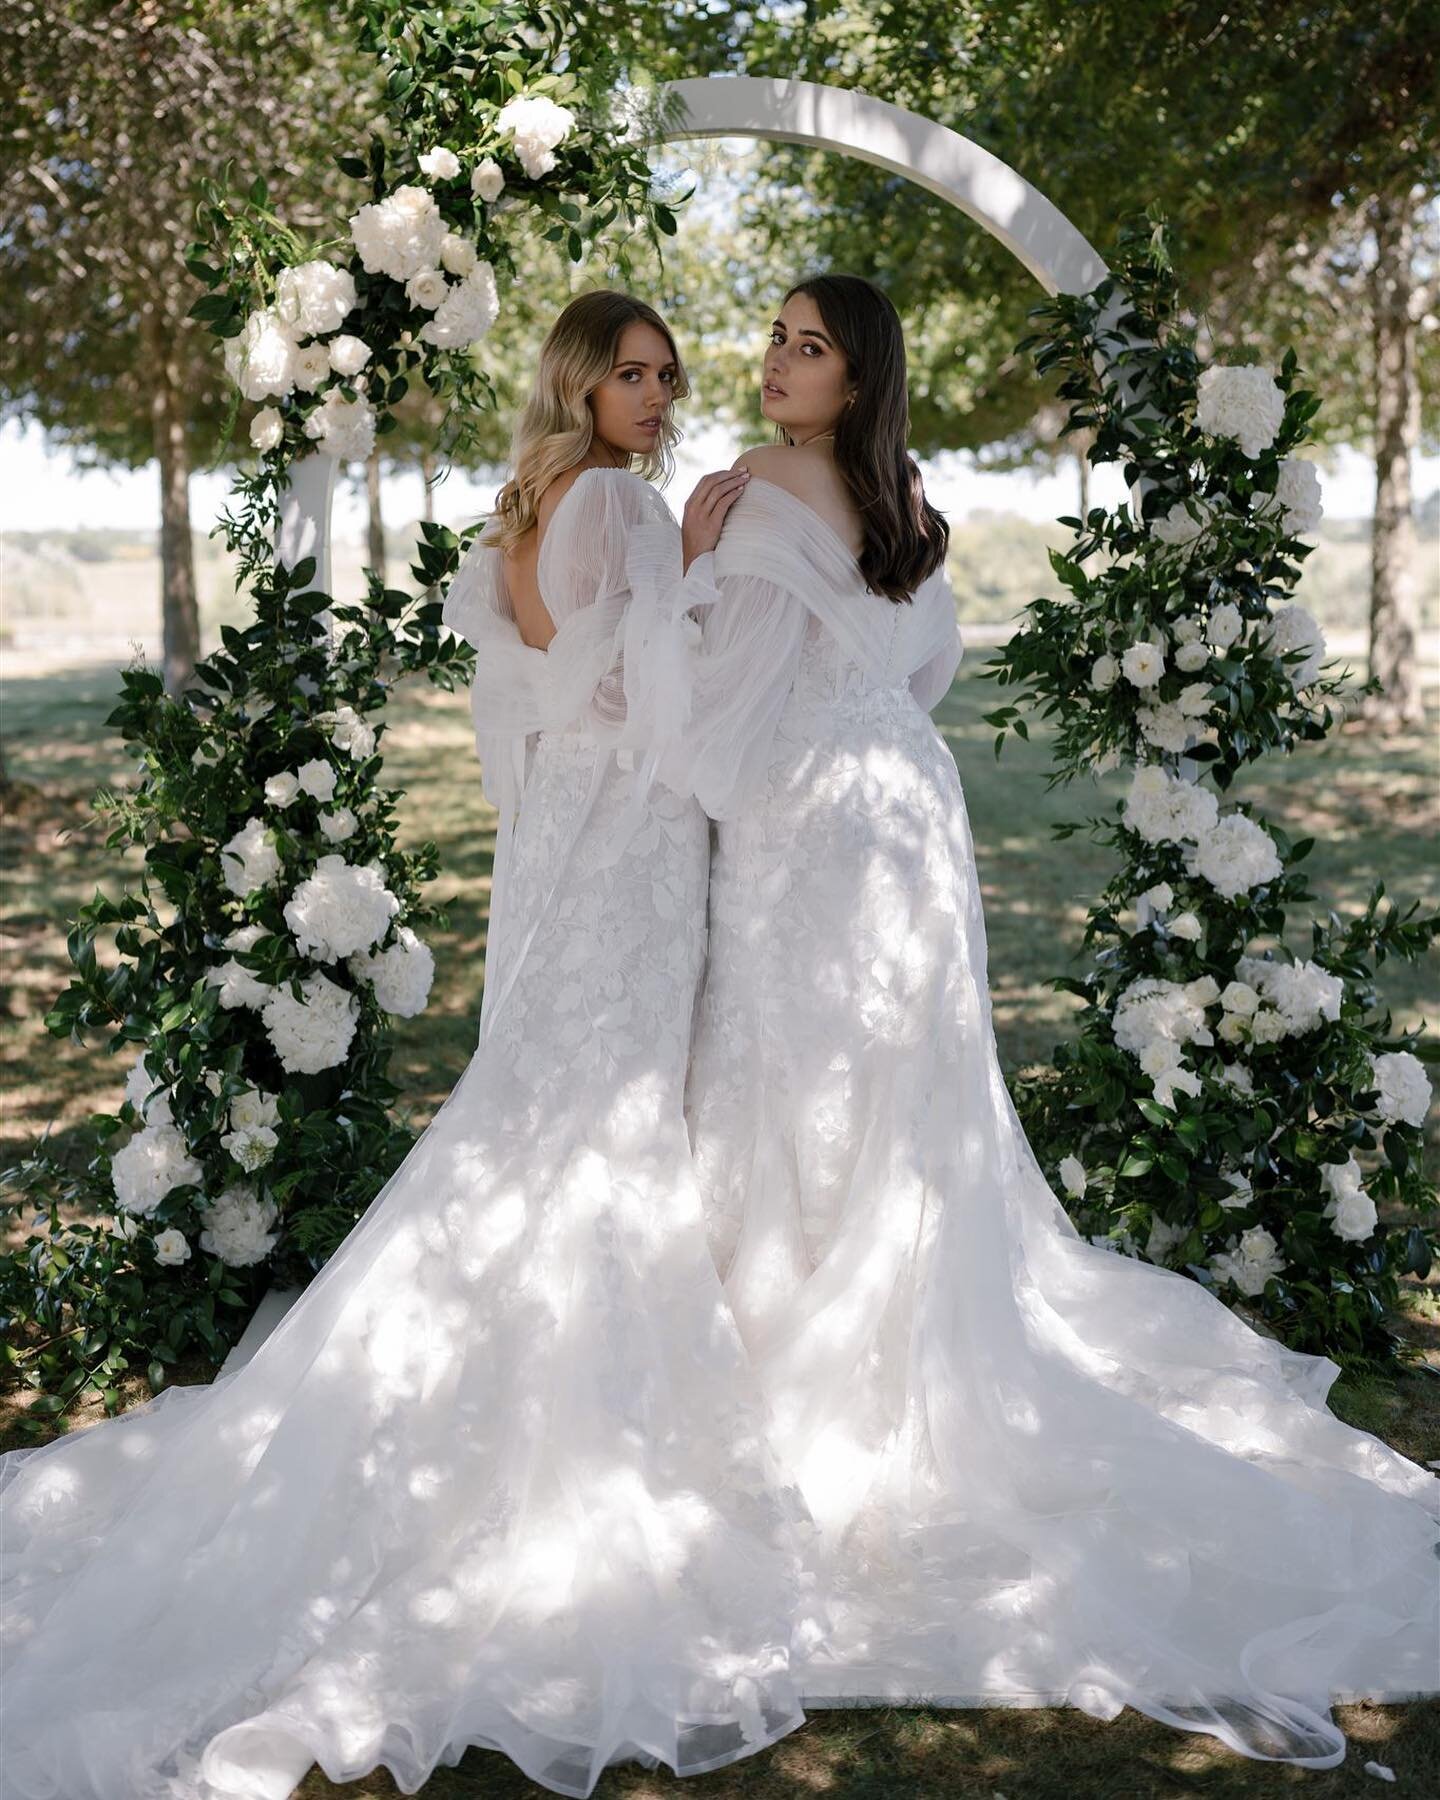 These two beauty&rsquo;s from Hera Couture&rsquo;s latest bridal gown campaign, simply stunning! 🤍🤍

Photo | @haute.weddings 
Bridal Gowns | @heracouture 
Hair + MU | @kimberly_hill_makeup_artist 
Florals | @libertyeventstyling 

#bride #bridalmake